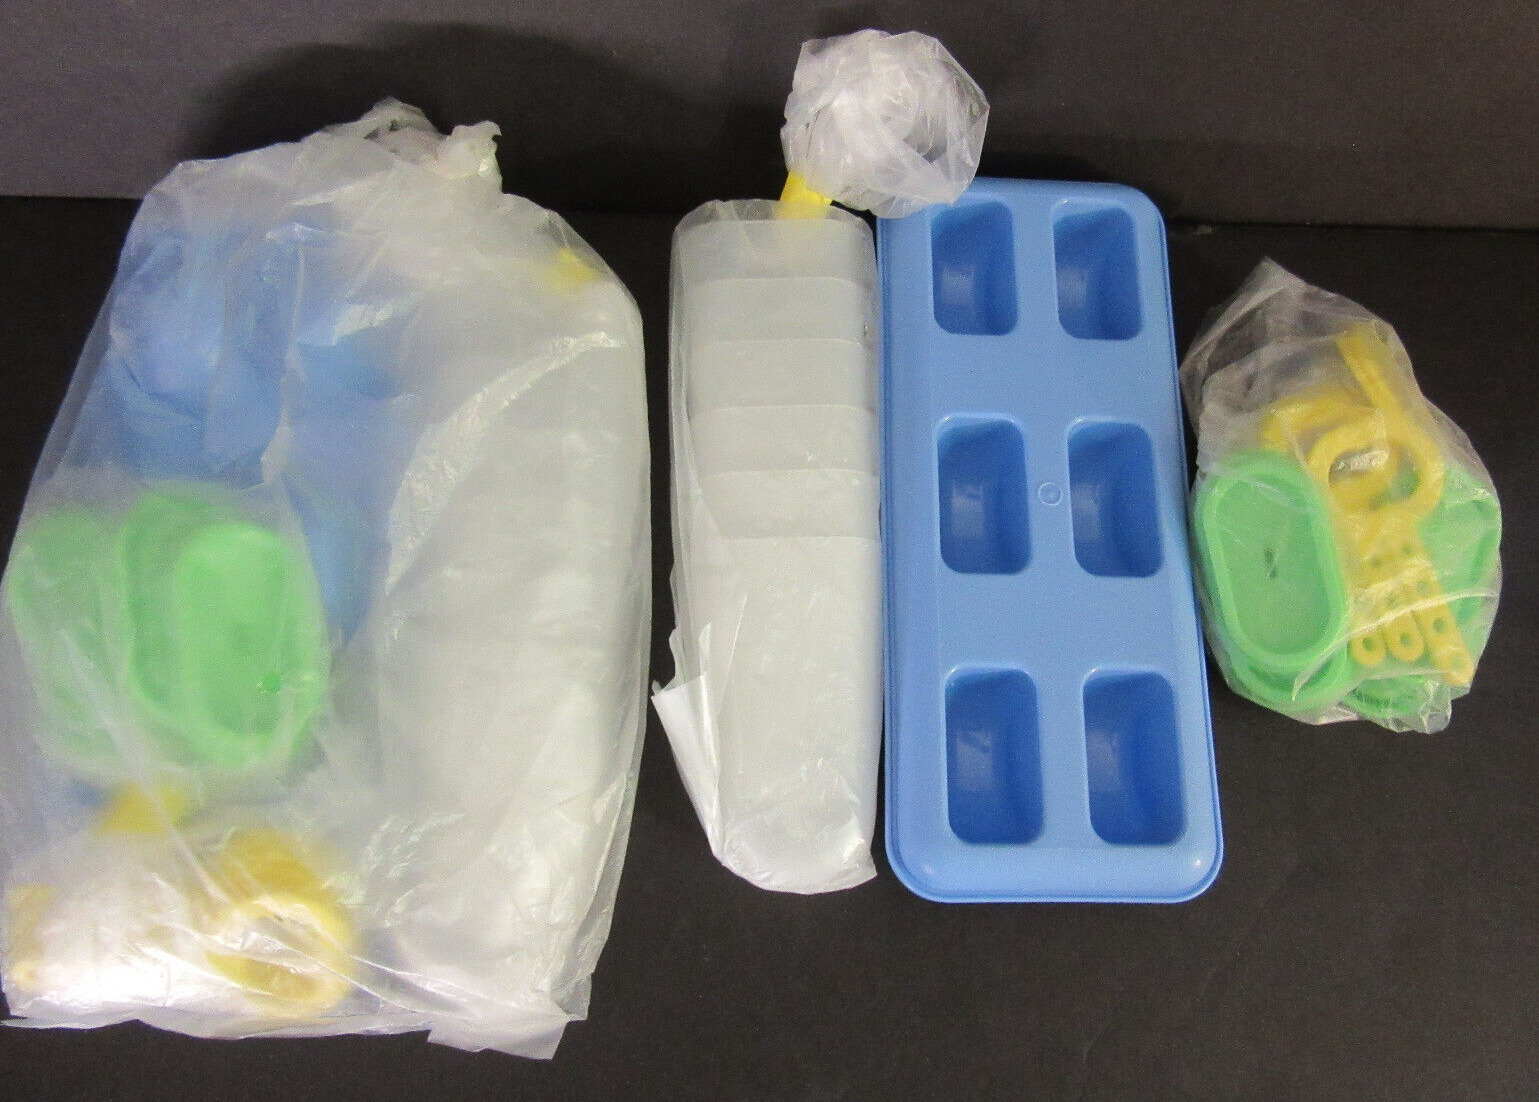 12 Tupperware Ice Tups Popsicle Molds w/Trays blue green yellow #481 NOS